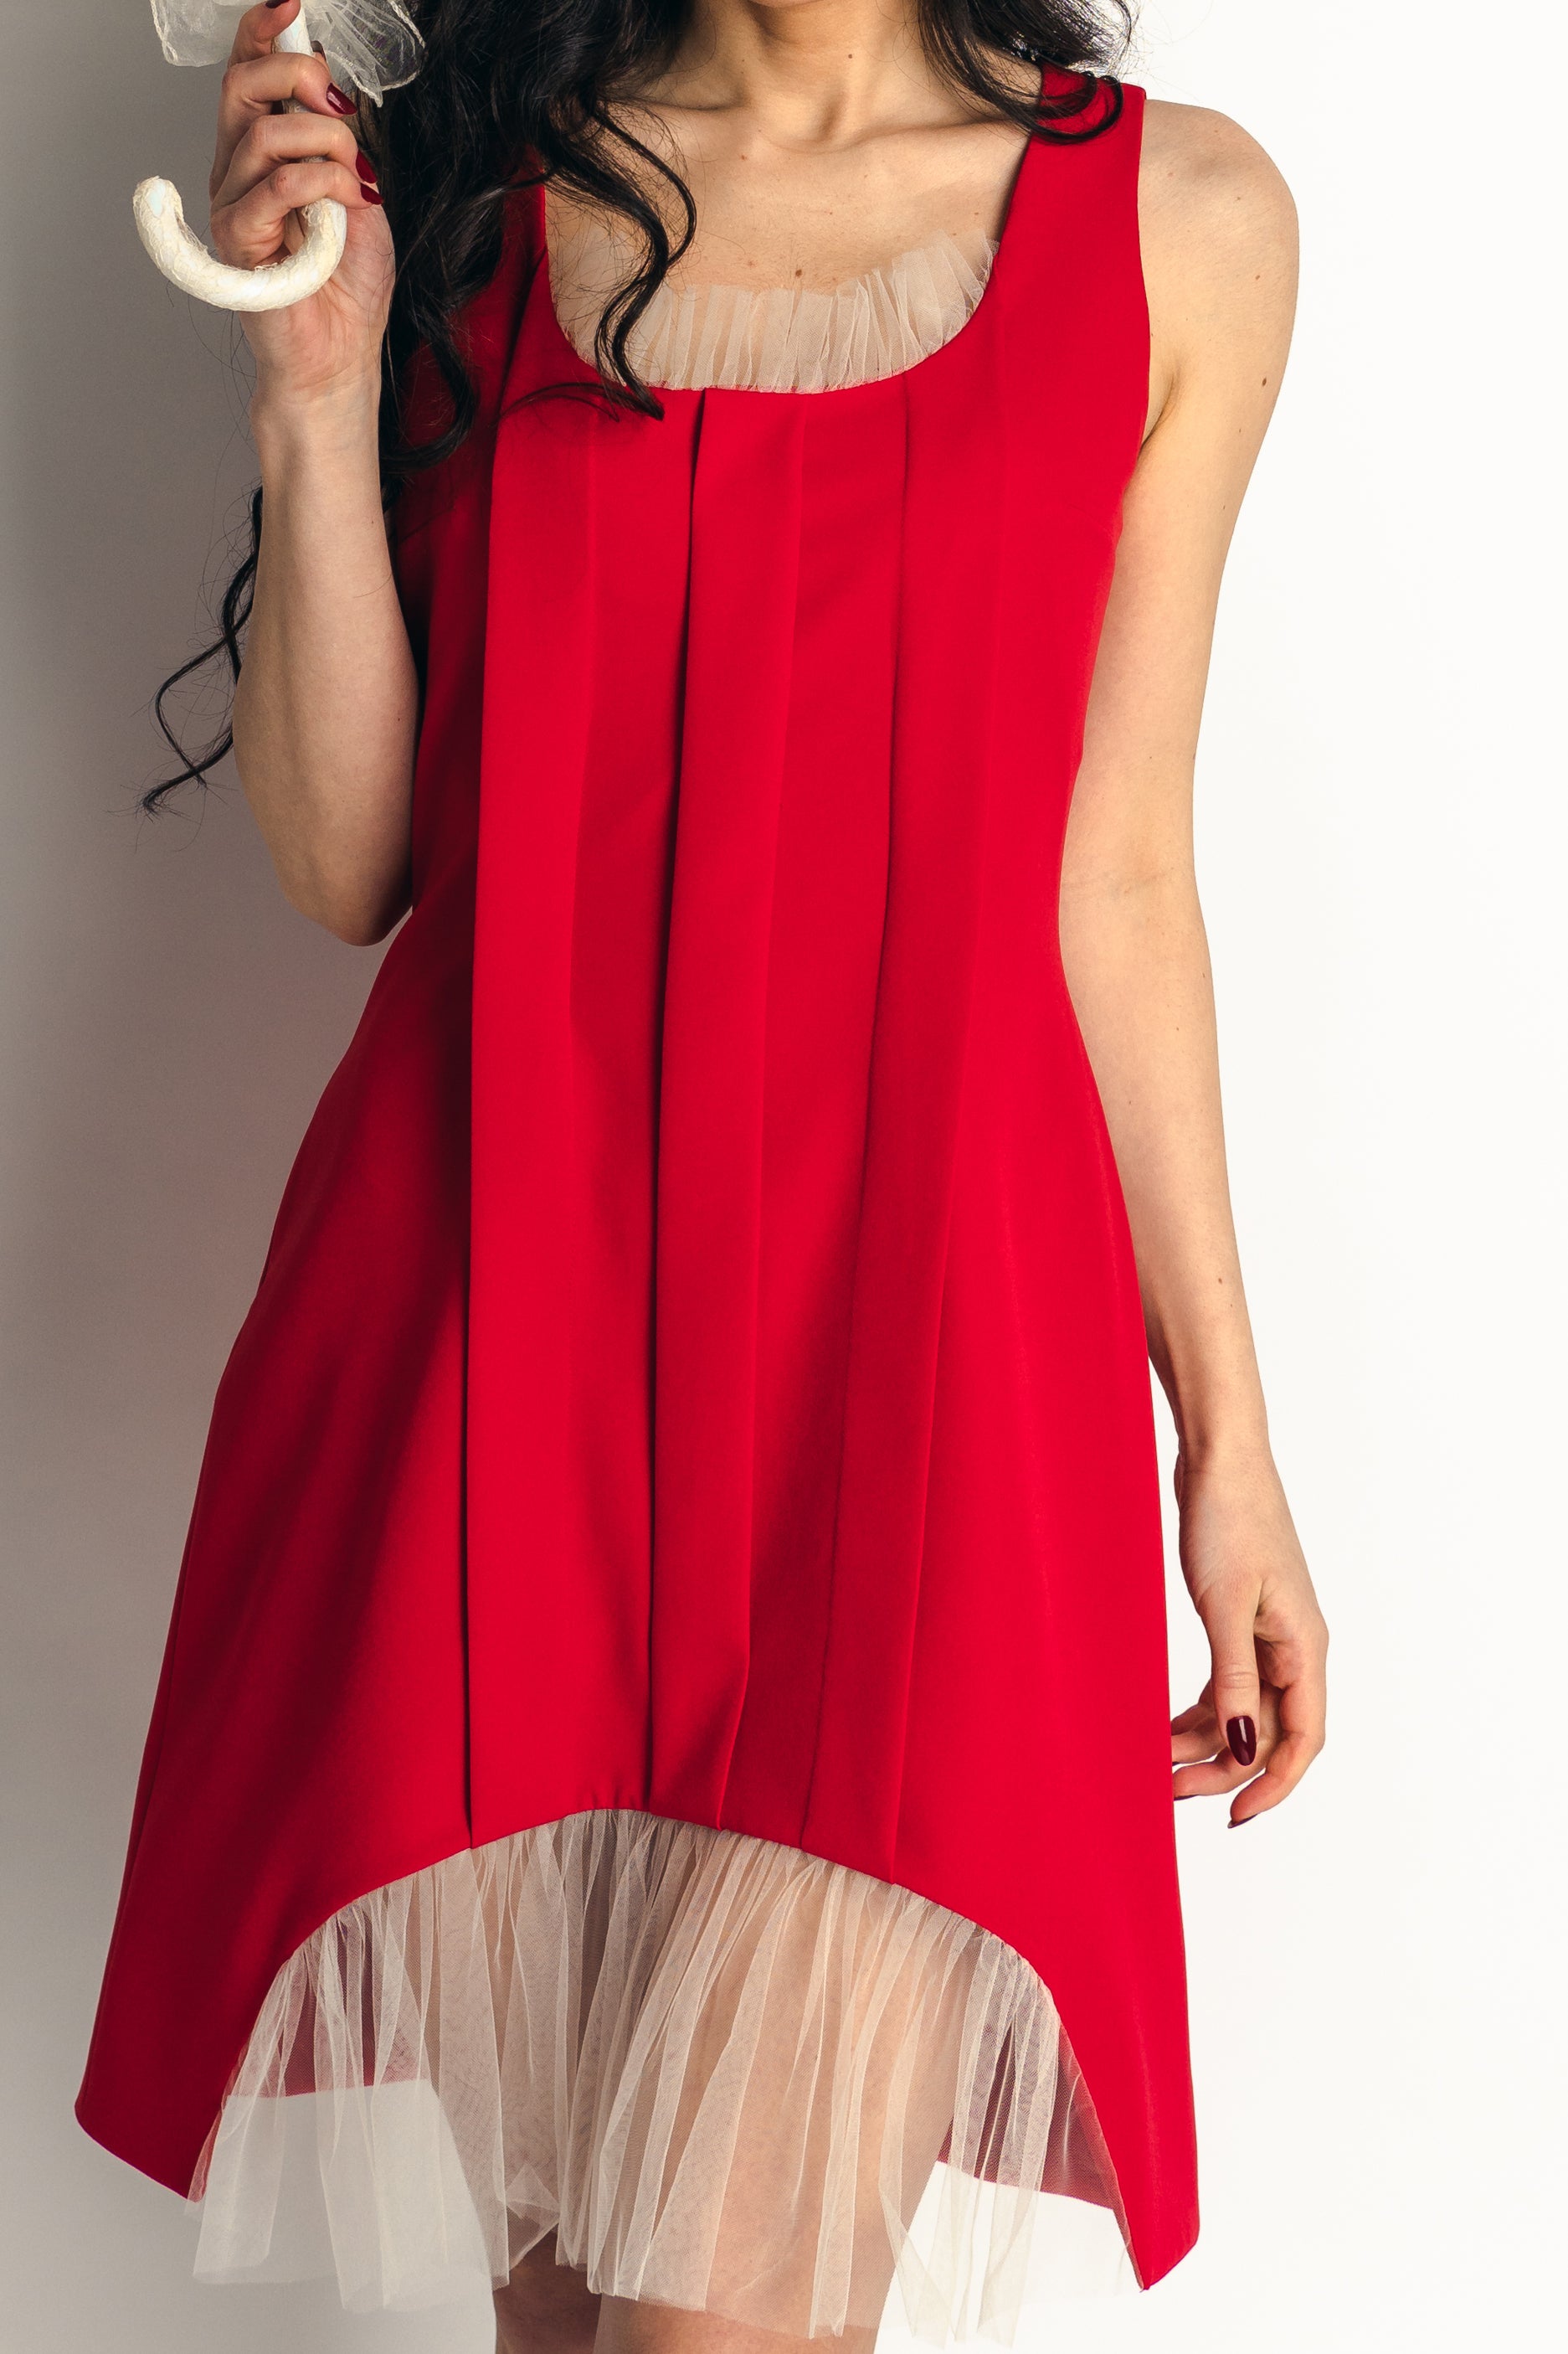 "Mon Paris" Romantic Dress Pleated Design Couture Dress In Red - front torso zoomed